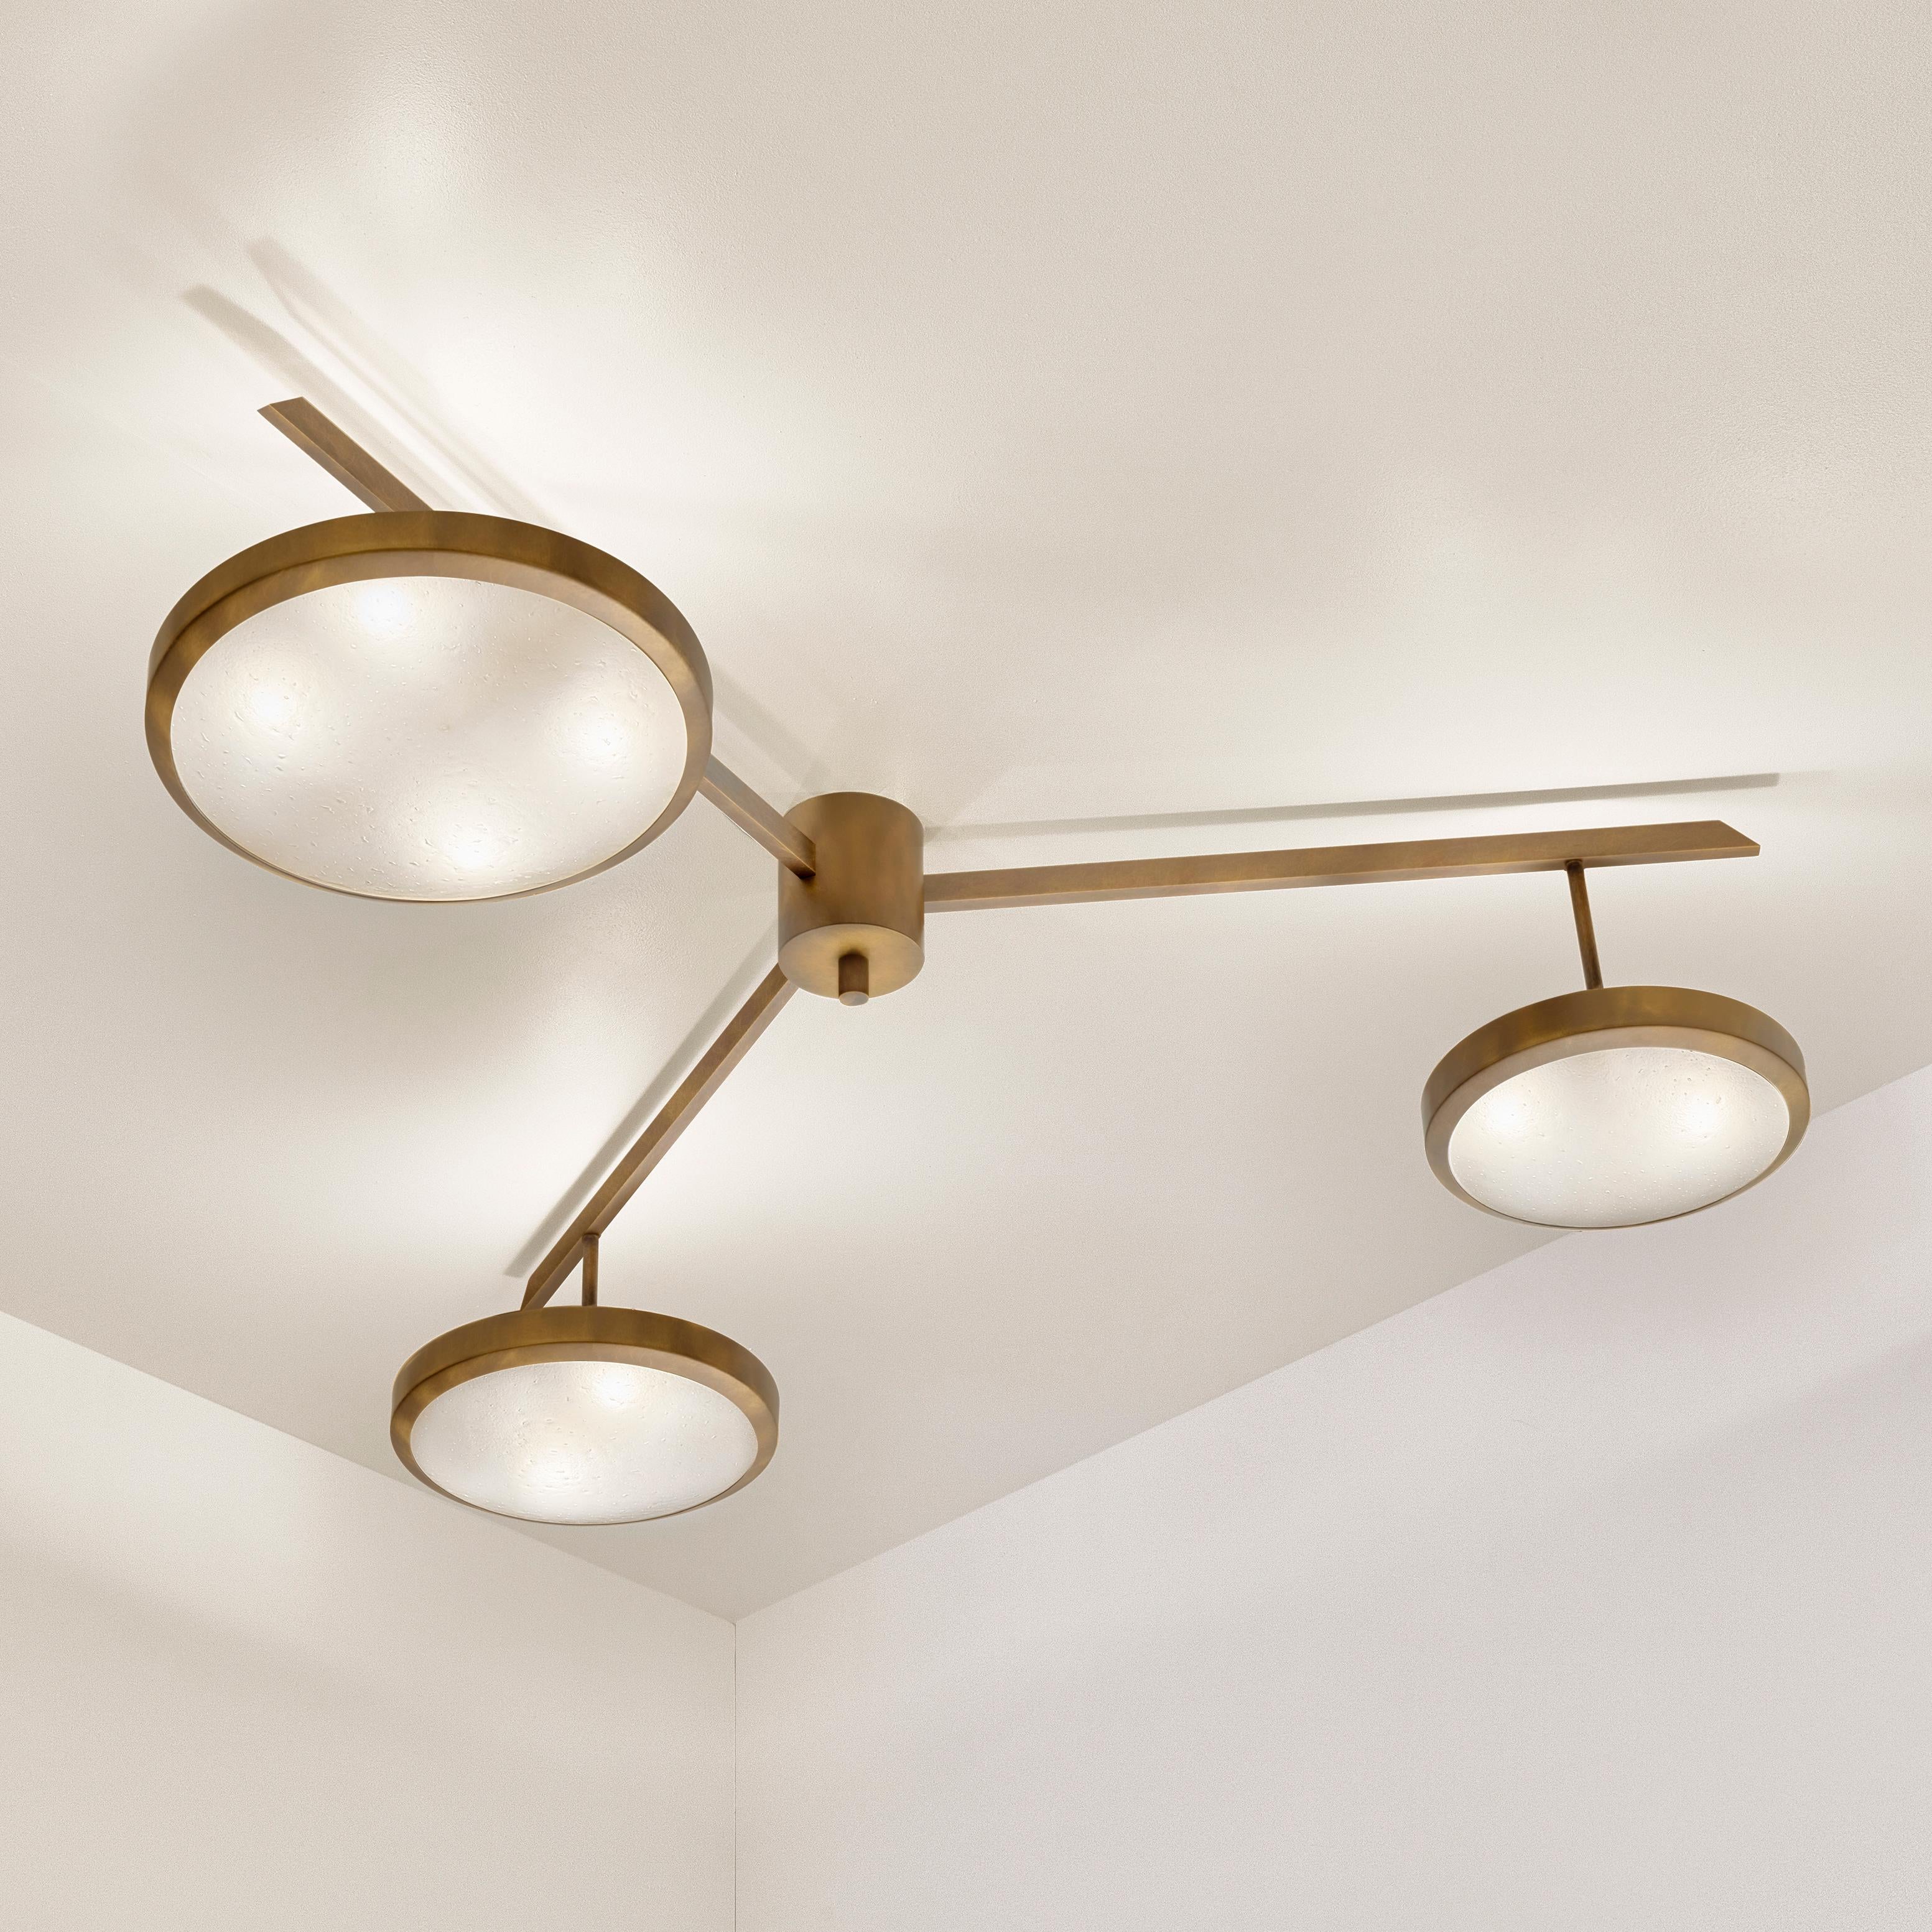 Contemporary Tre Ceiling Light by Gaspare Asaro - Polished Brass Finish For Sale